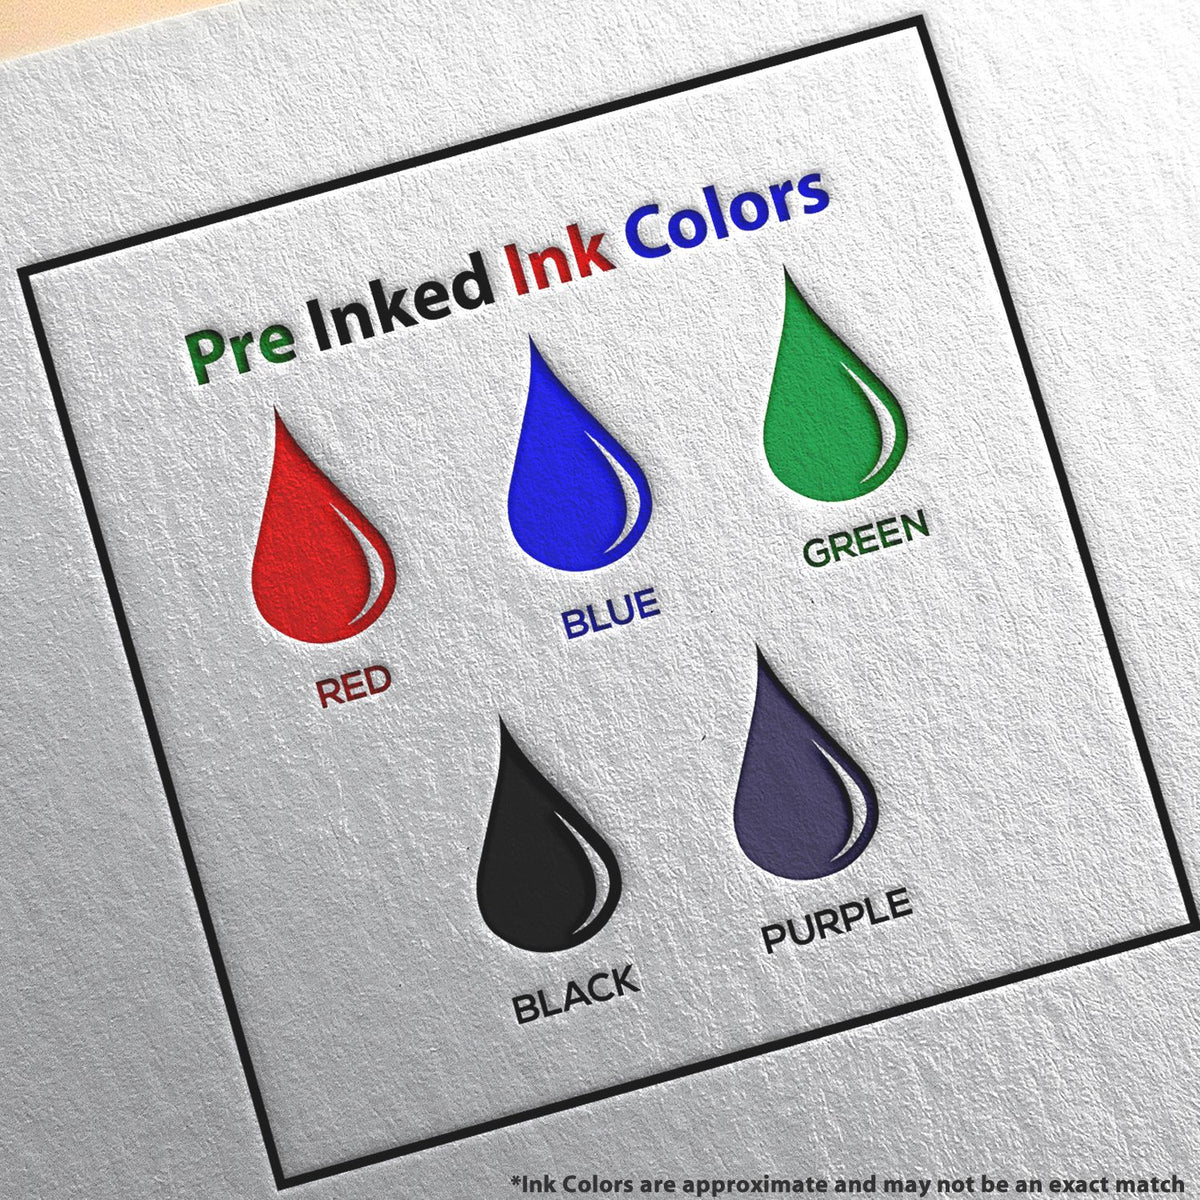 A picture showing the different ink colors or hues available for the Slim Pre-Inked Massachusetts Landscape Architect Seal Stamp product.